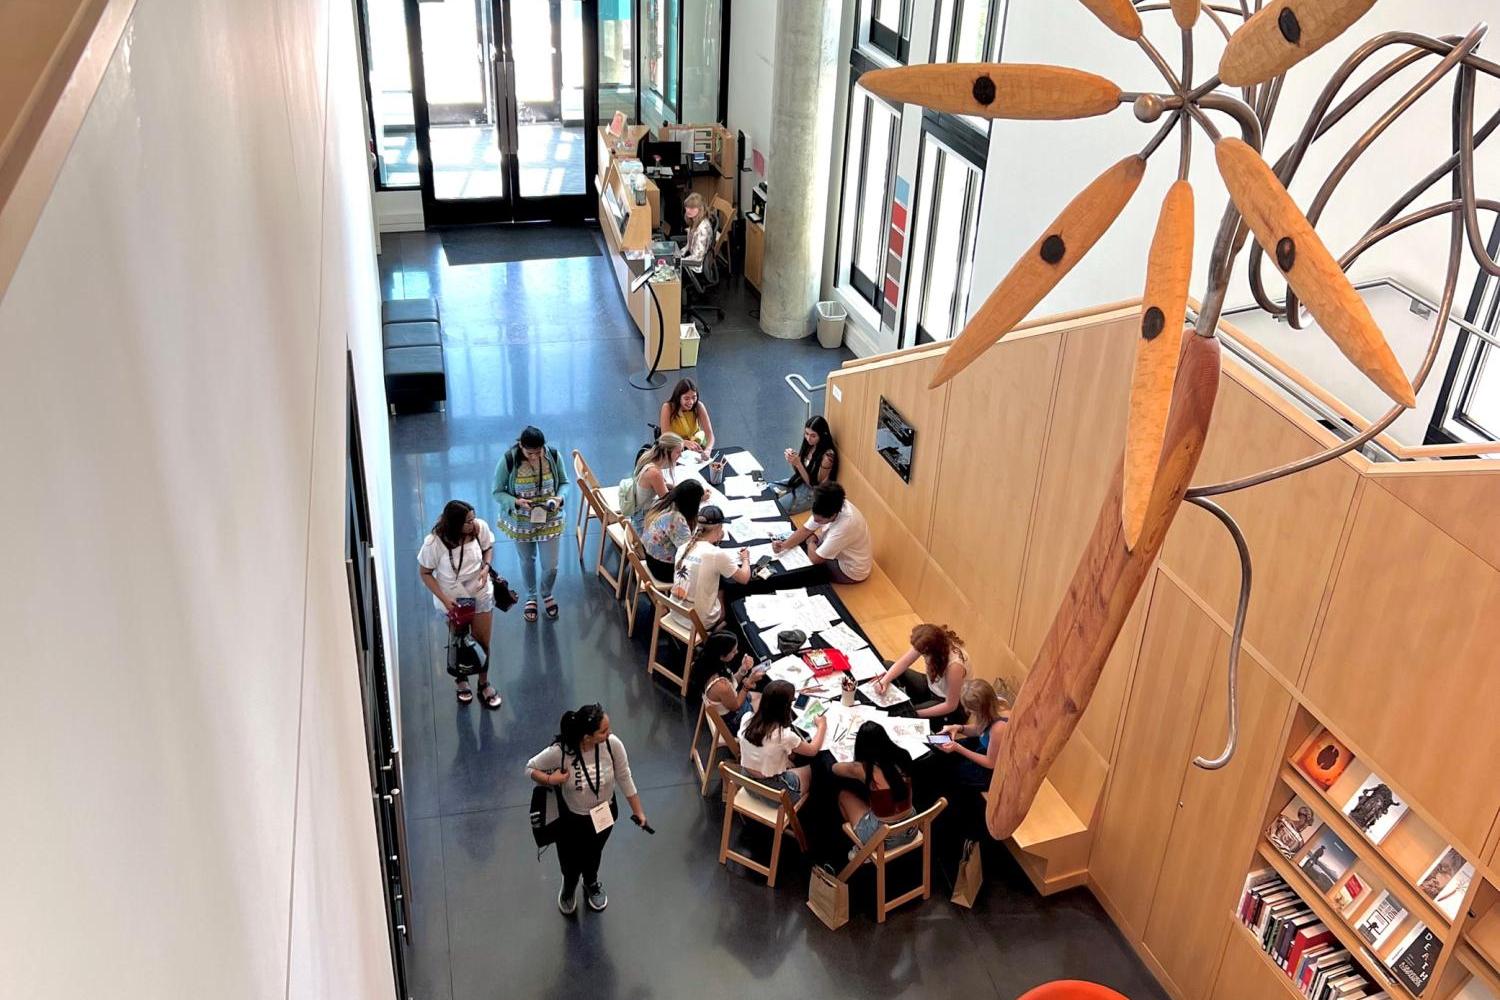 An arial view of the CU Art Museum lobby. Many people are gathered at a table while making art together, and a large metal and wood sculpture is suspended from the ceiling in the foreground.